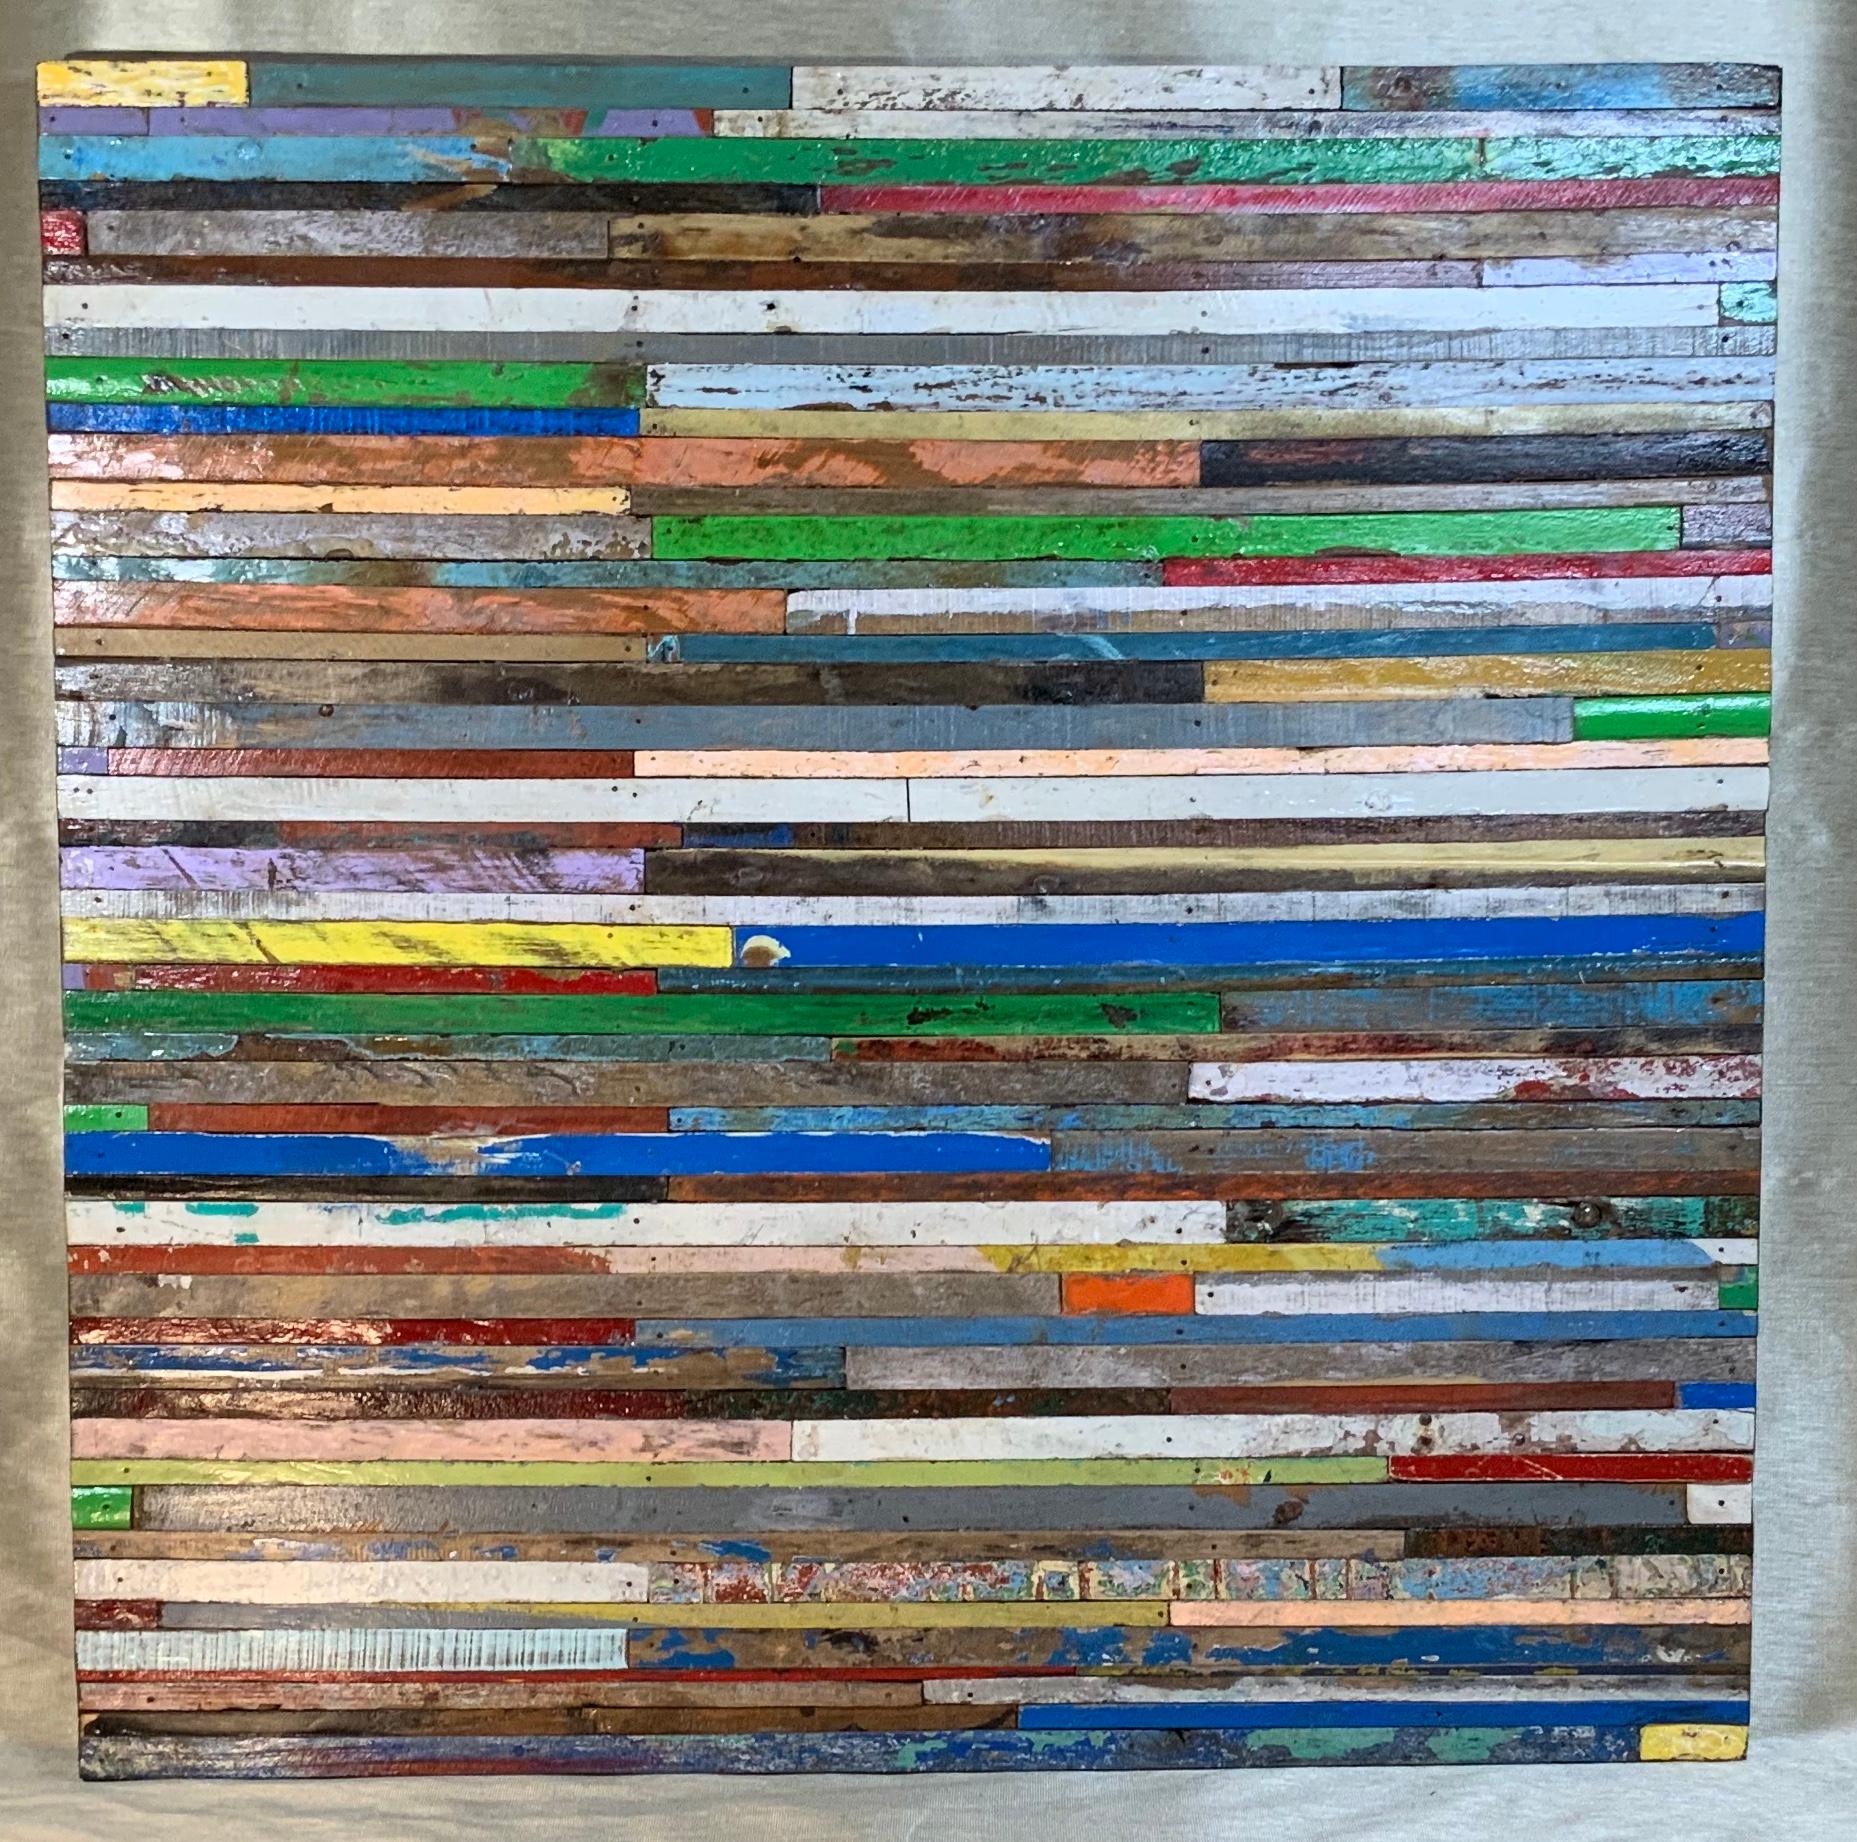 Exceptional wall hanging wood sculpture made of multi-colors reclaimed wood strips cuts, to put together beautiful mosaic of colors
By this unknown artist.
Could be use horizontal or vertical.